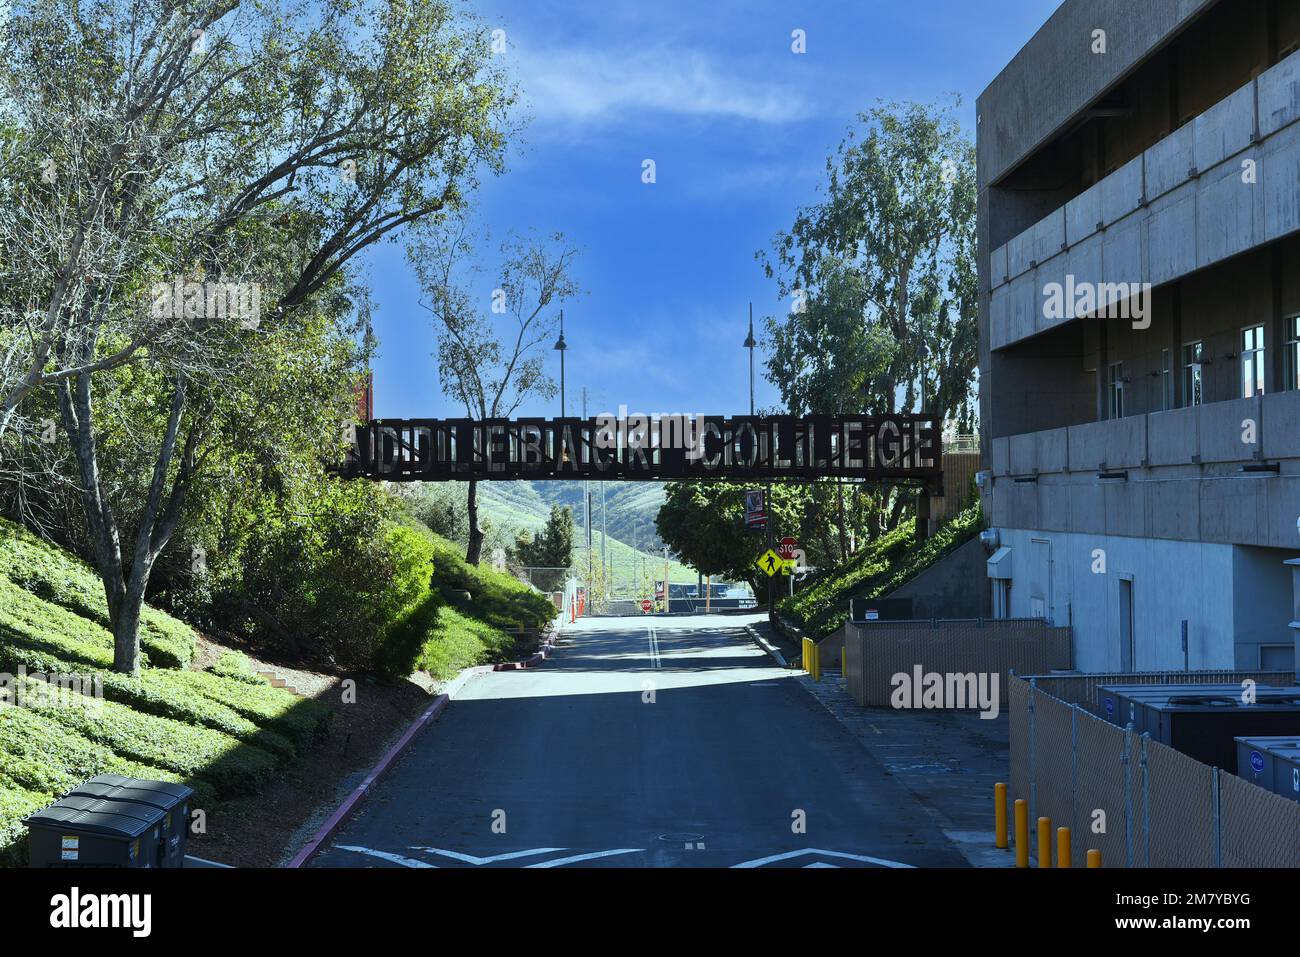 MISSION VIEJO, CALIFORNIA - 8 JAN 2023: Bridge over Library Road on the Campus of Saddleback College. Stock Photo